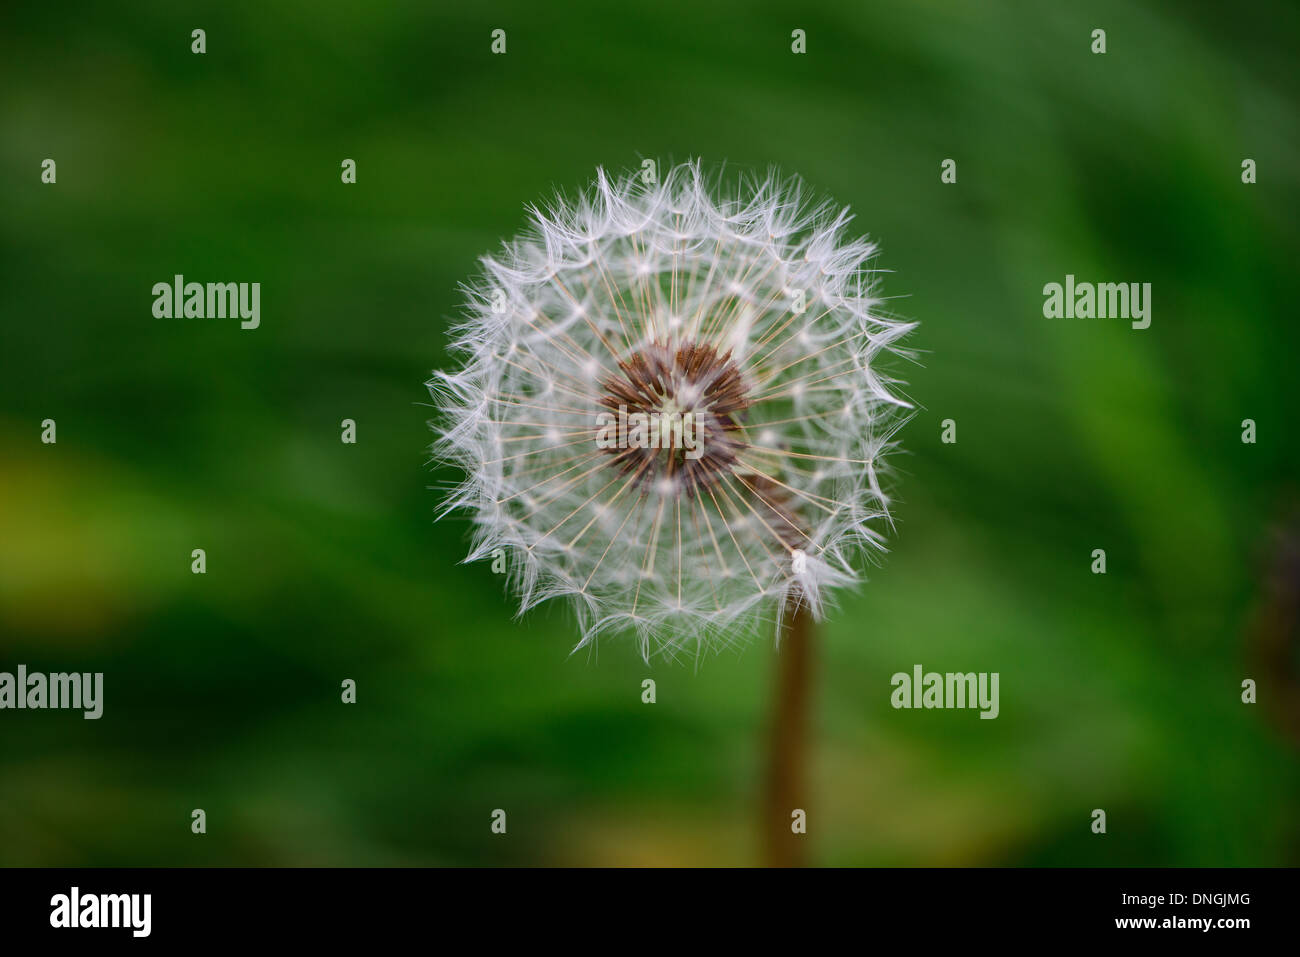 Dandelion Seed Head against vibrant green background. Stock Photo